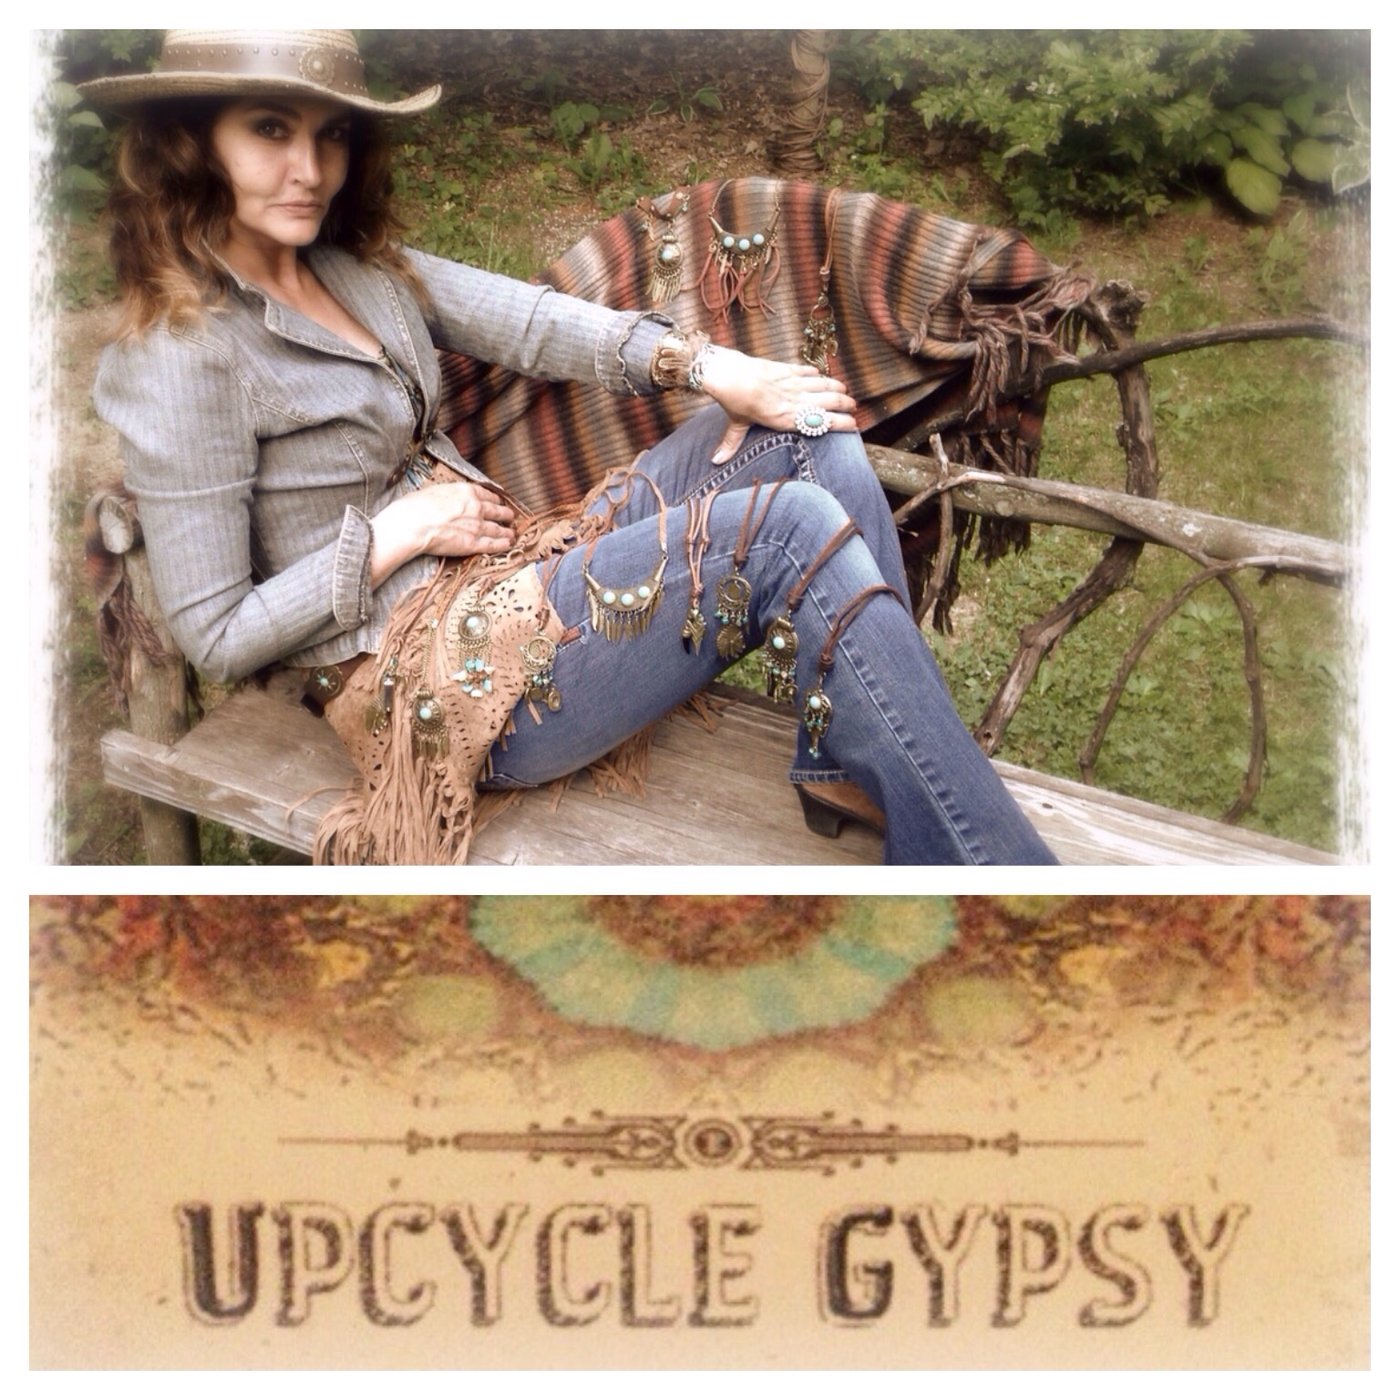 Upcycled Products – The Boujee Gypsy